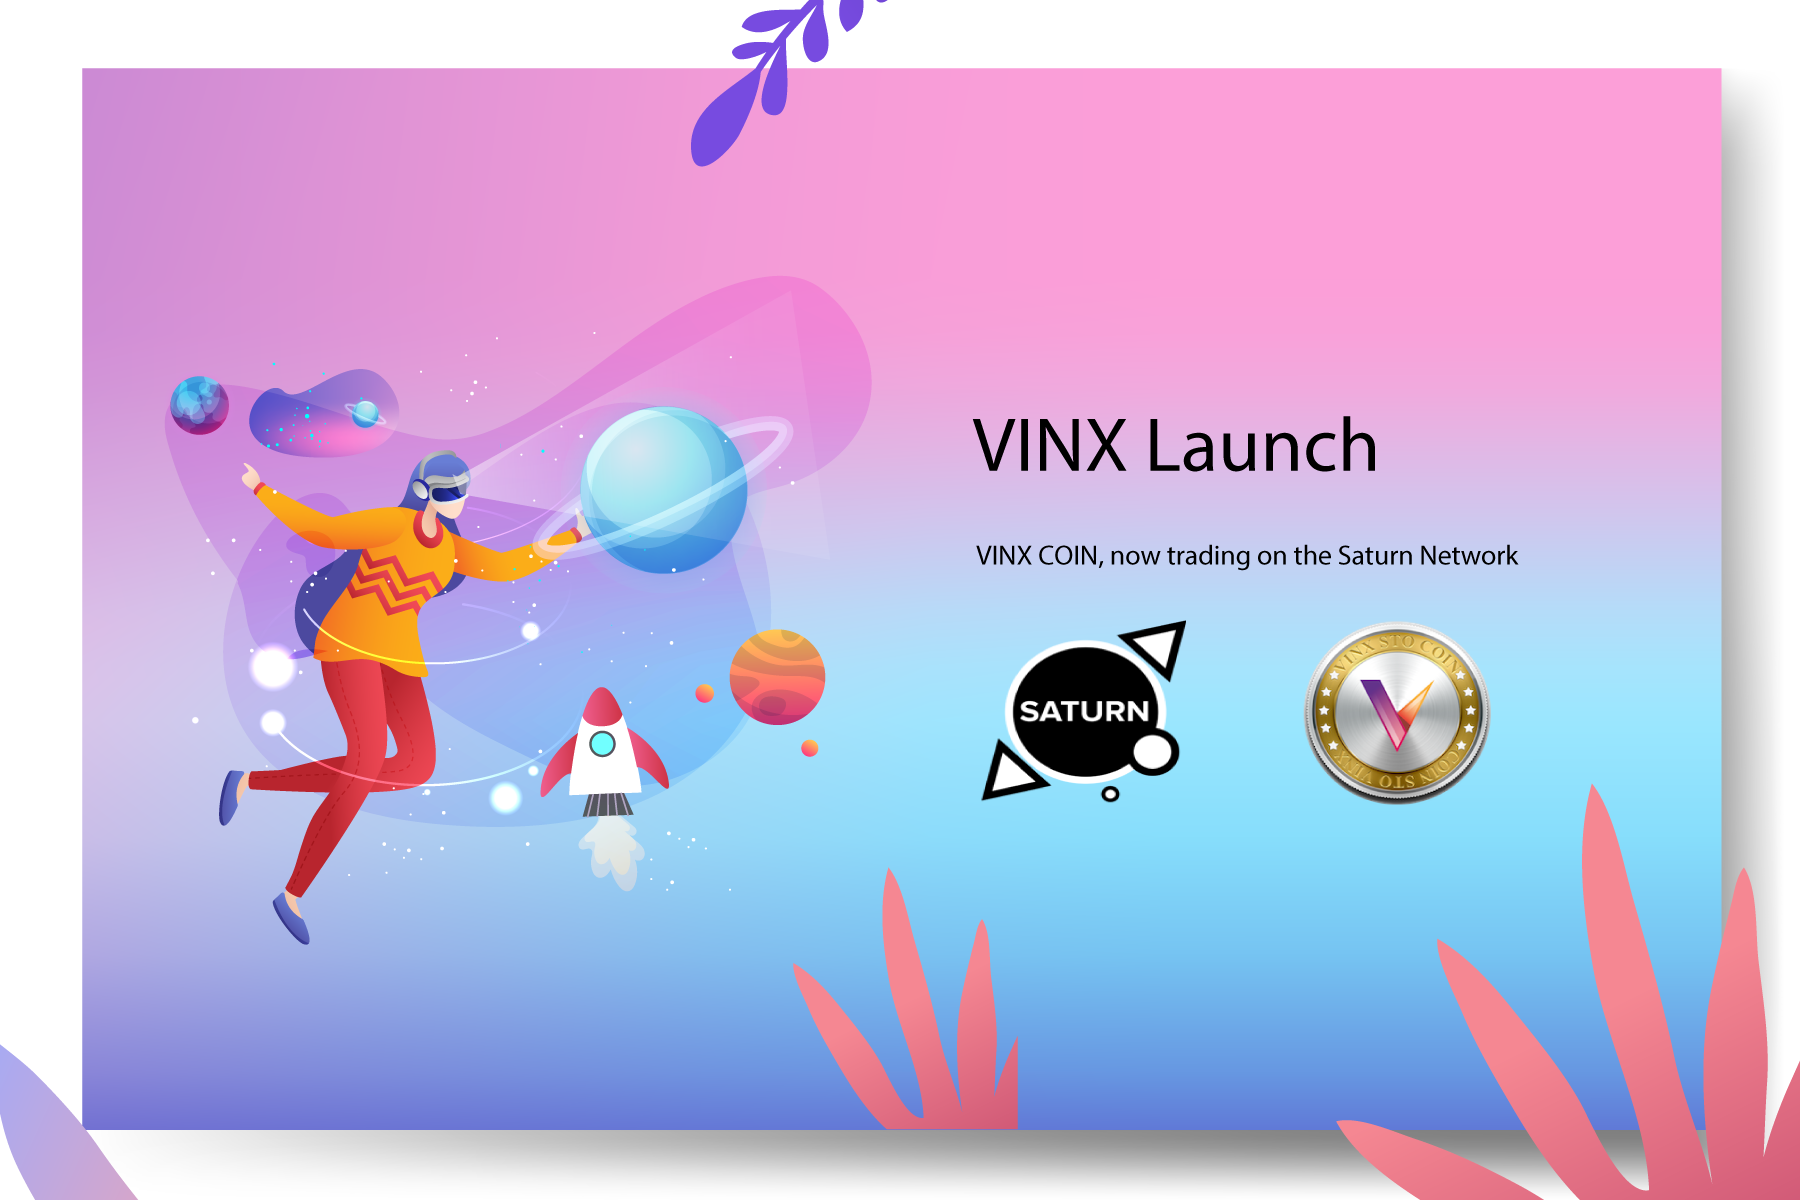 Vinito Capital Management’s Ethereum coin, VINX, is now trading on the Saturn Network